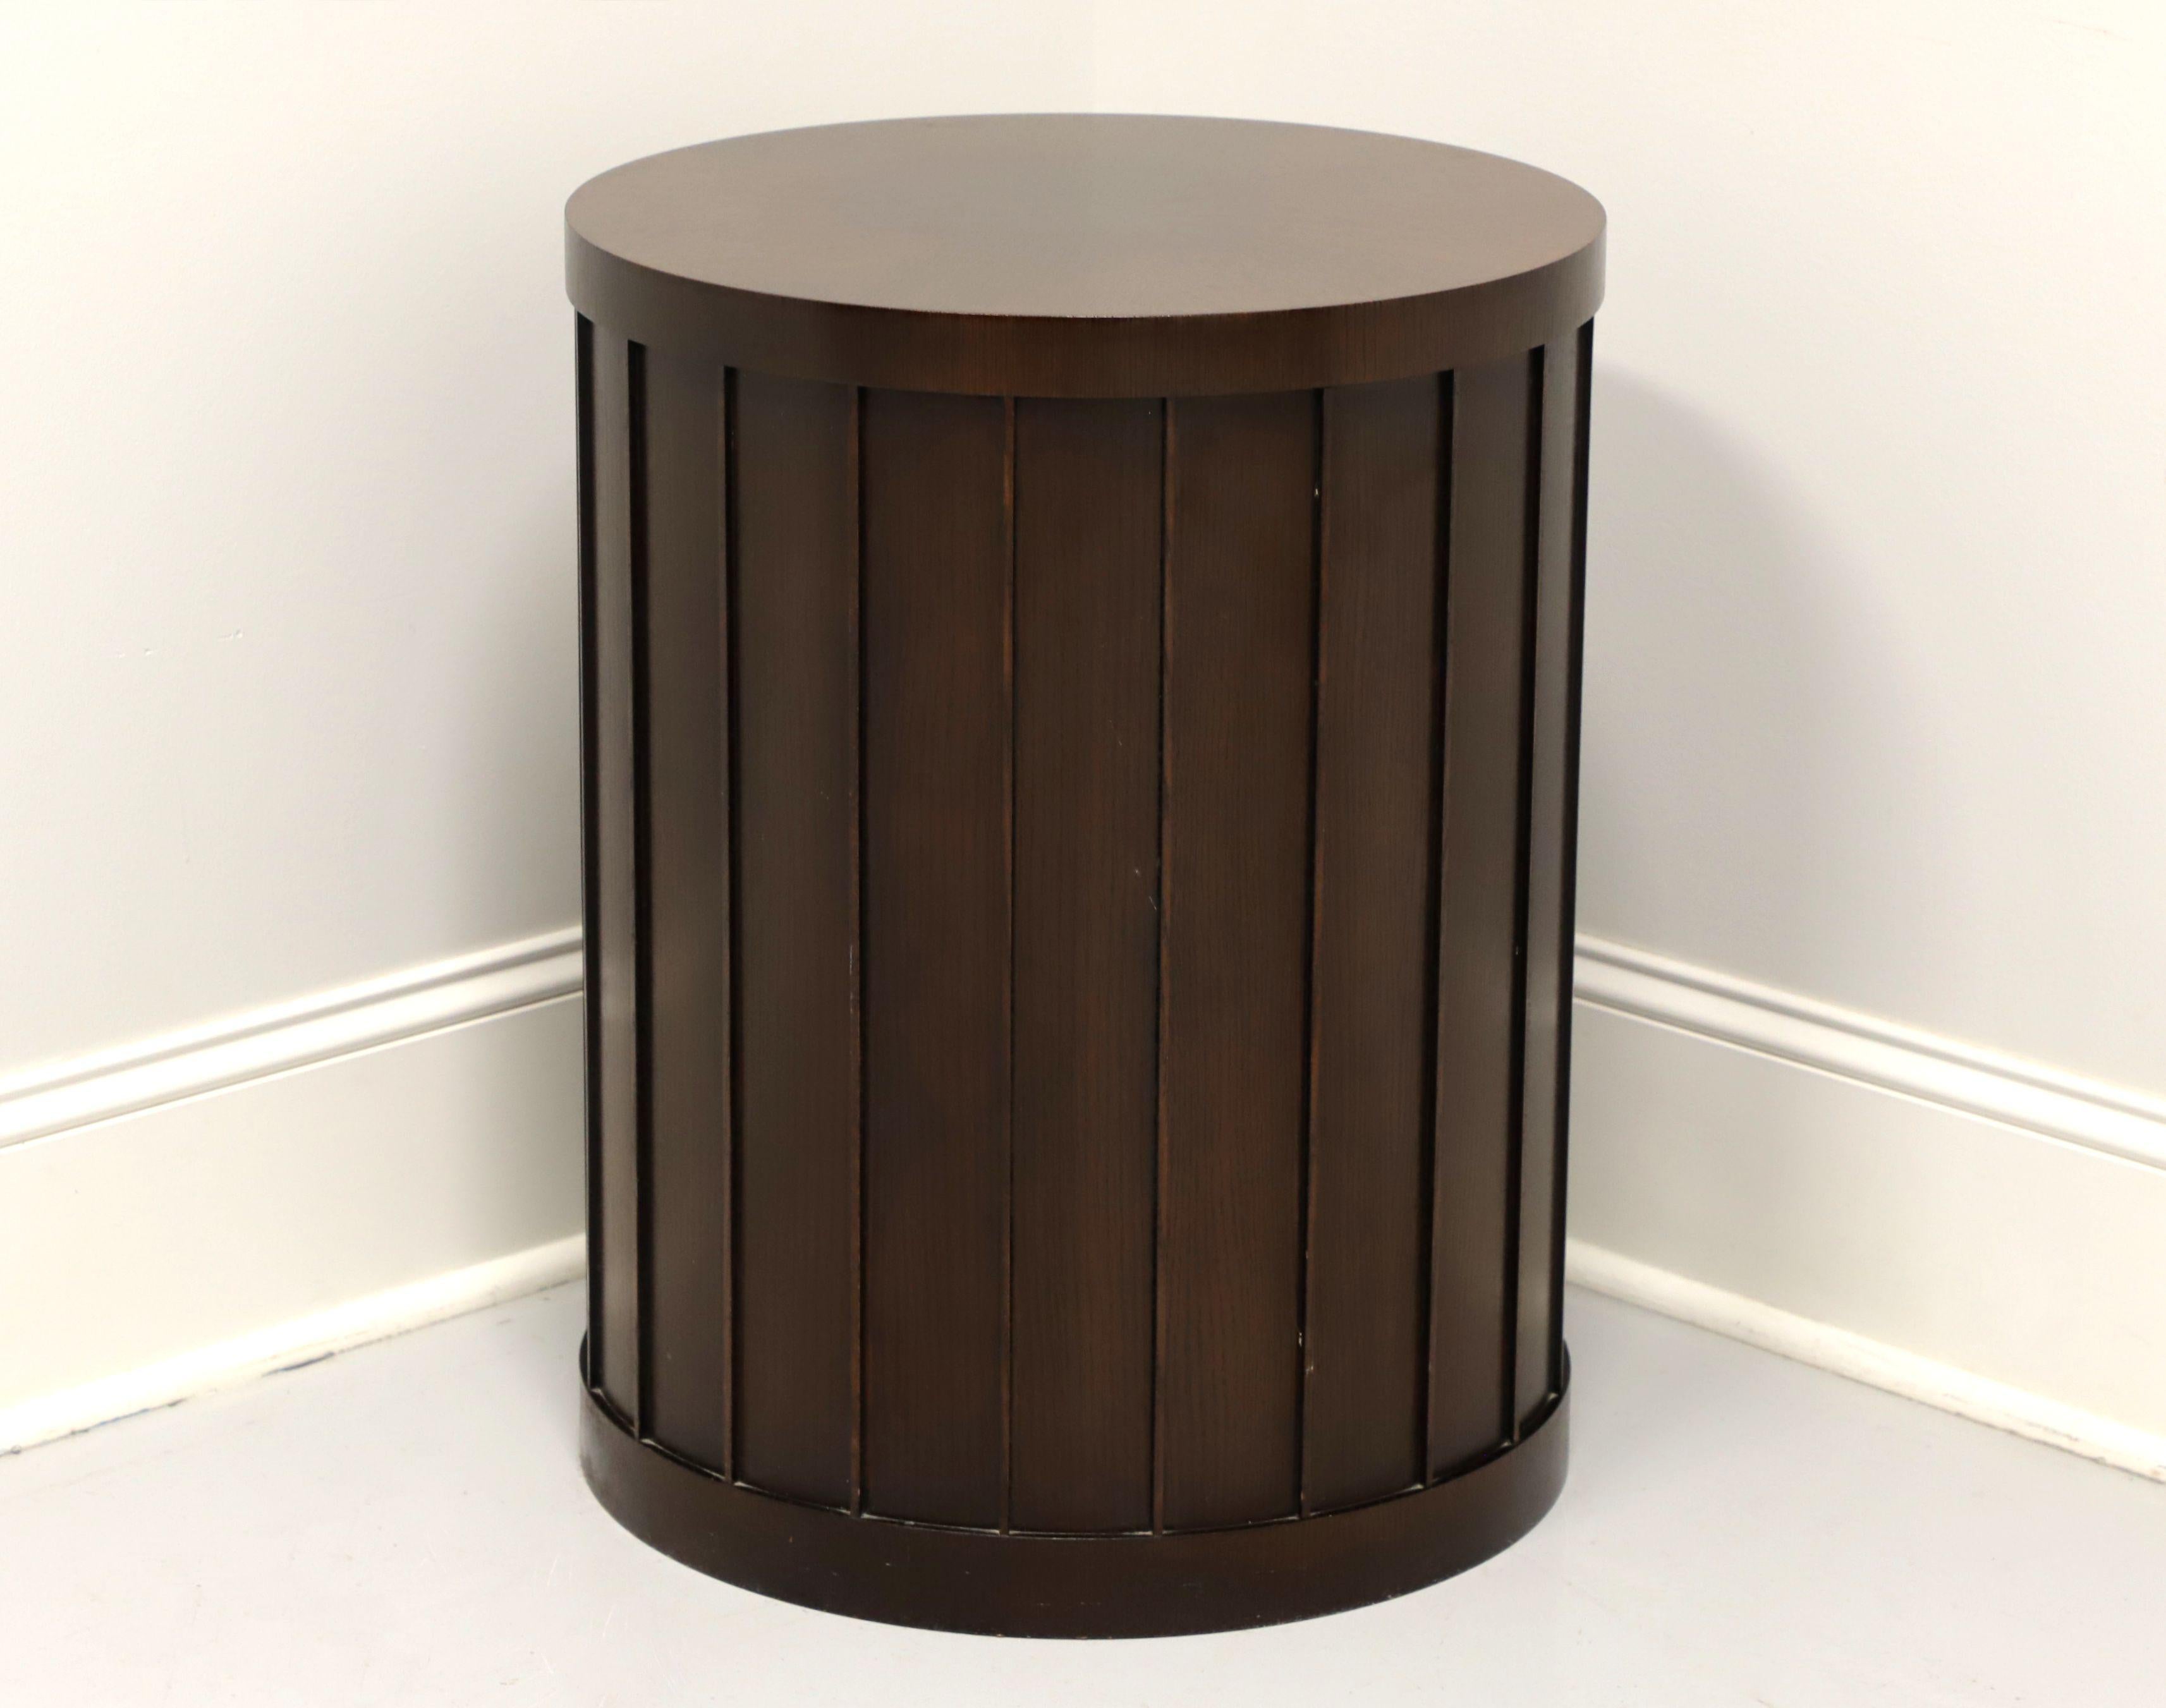 American Barbara Barry for Baker Contemporary Mahogany Round Cabinet Accent Table